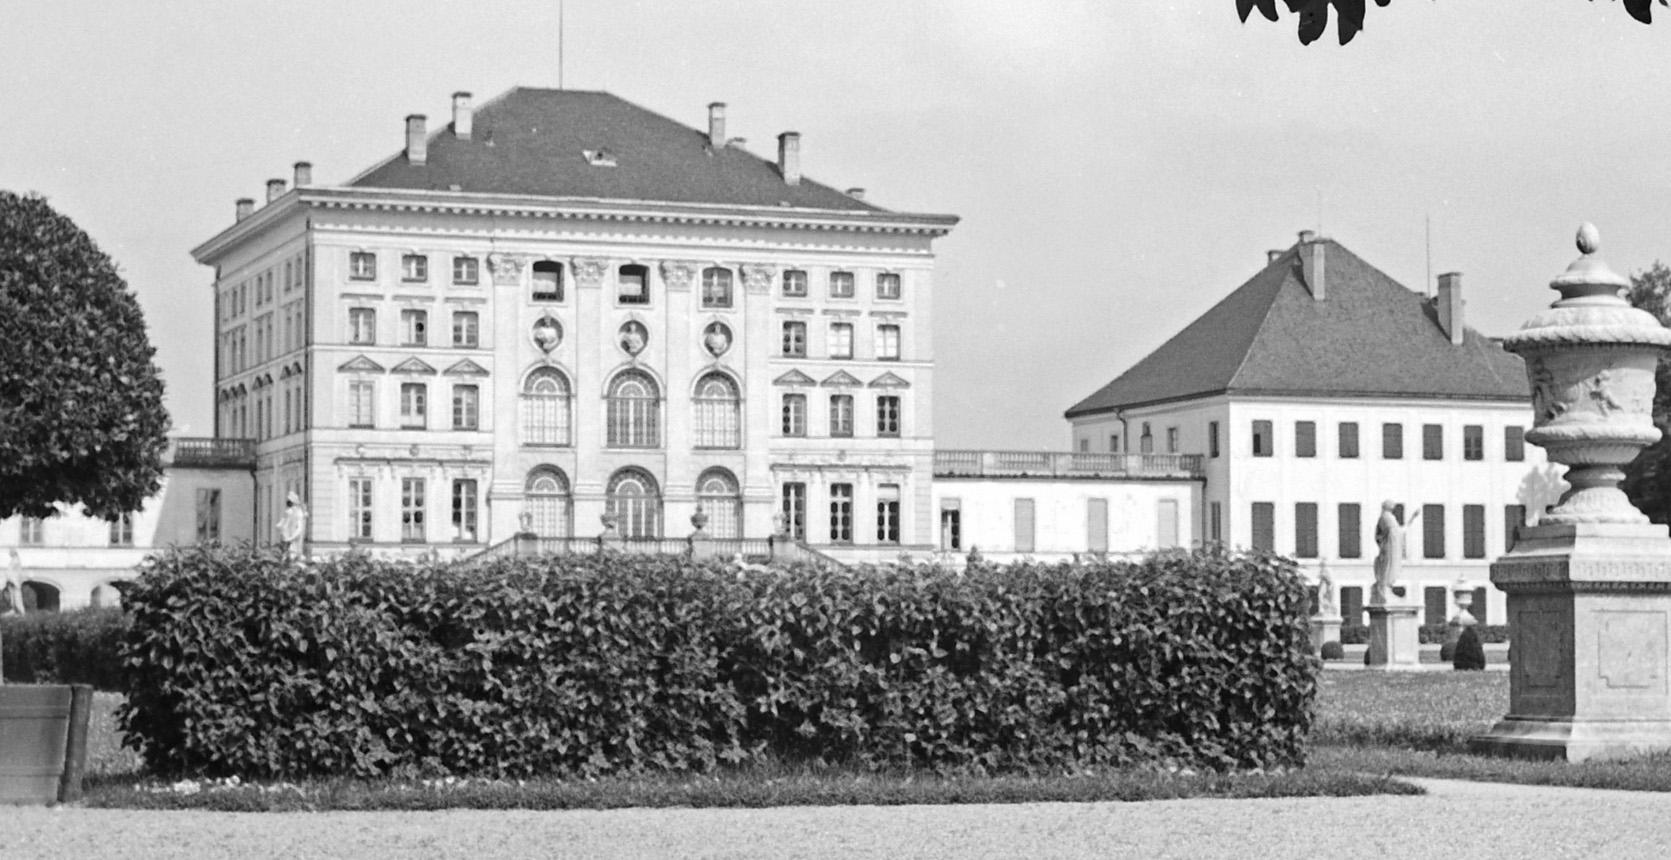 Park of Nymphenburg castle in the West of Munich, Germany 1937, Printed Later - Photograph by Karl Heinrich Lämmel